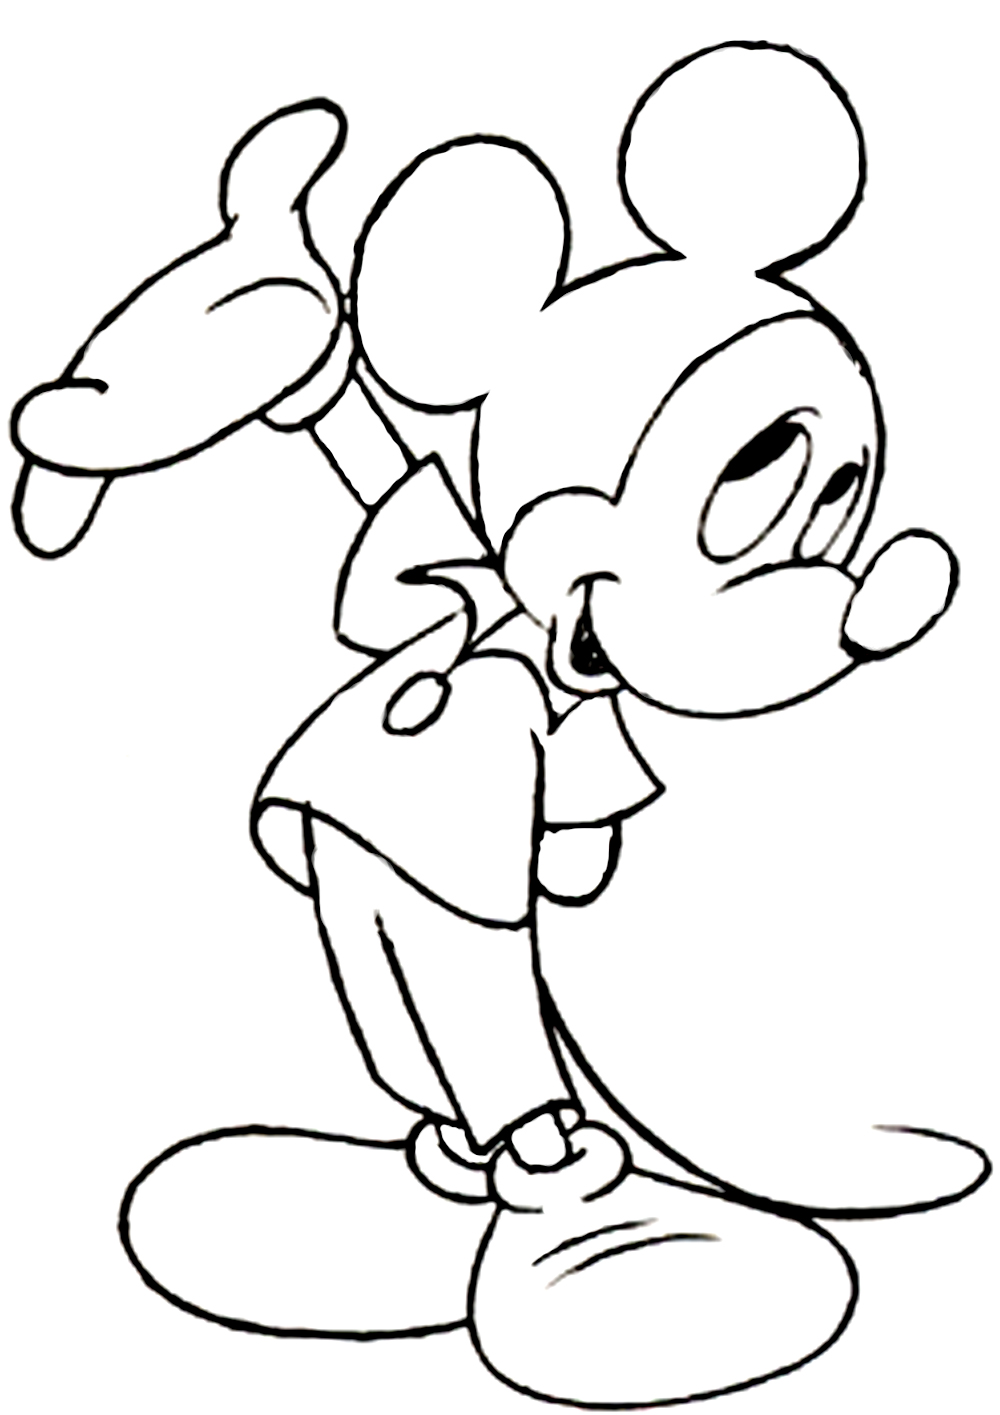 Mickey Mouse Coloring Pages 12